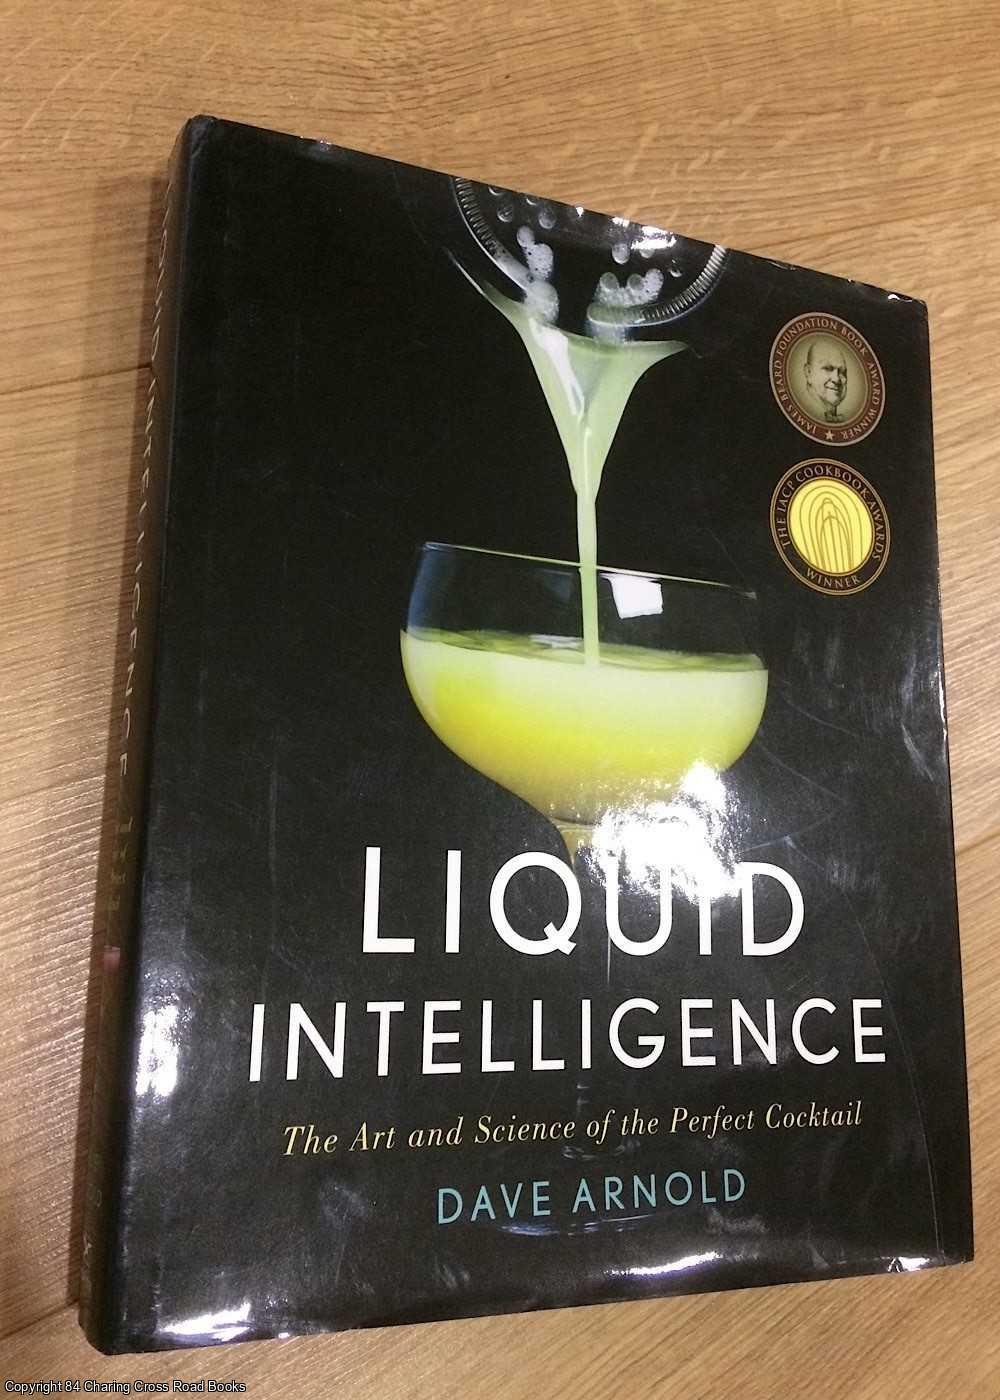 Arnold, Dave - Liquid Intelligence - The Art and Science of the Perfect Cocktail